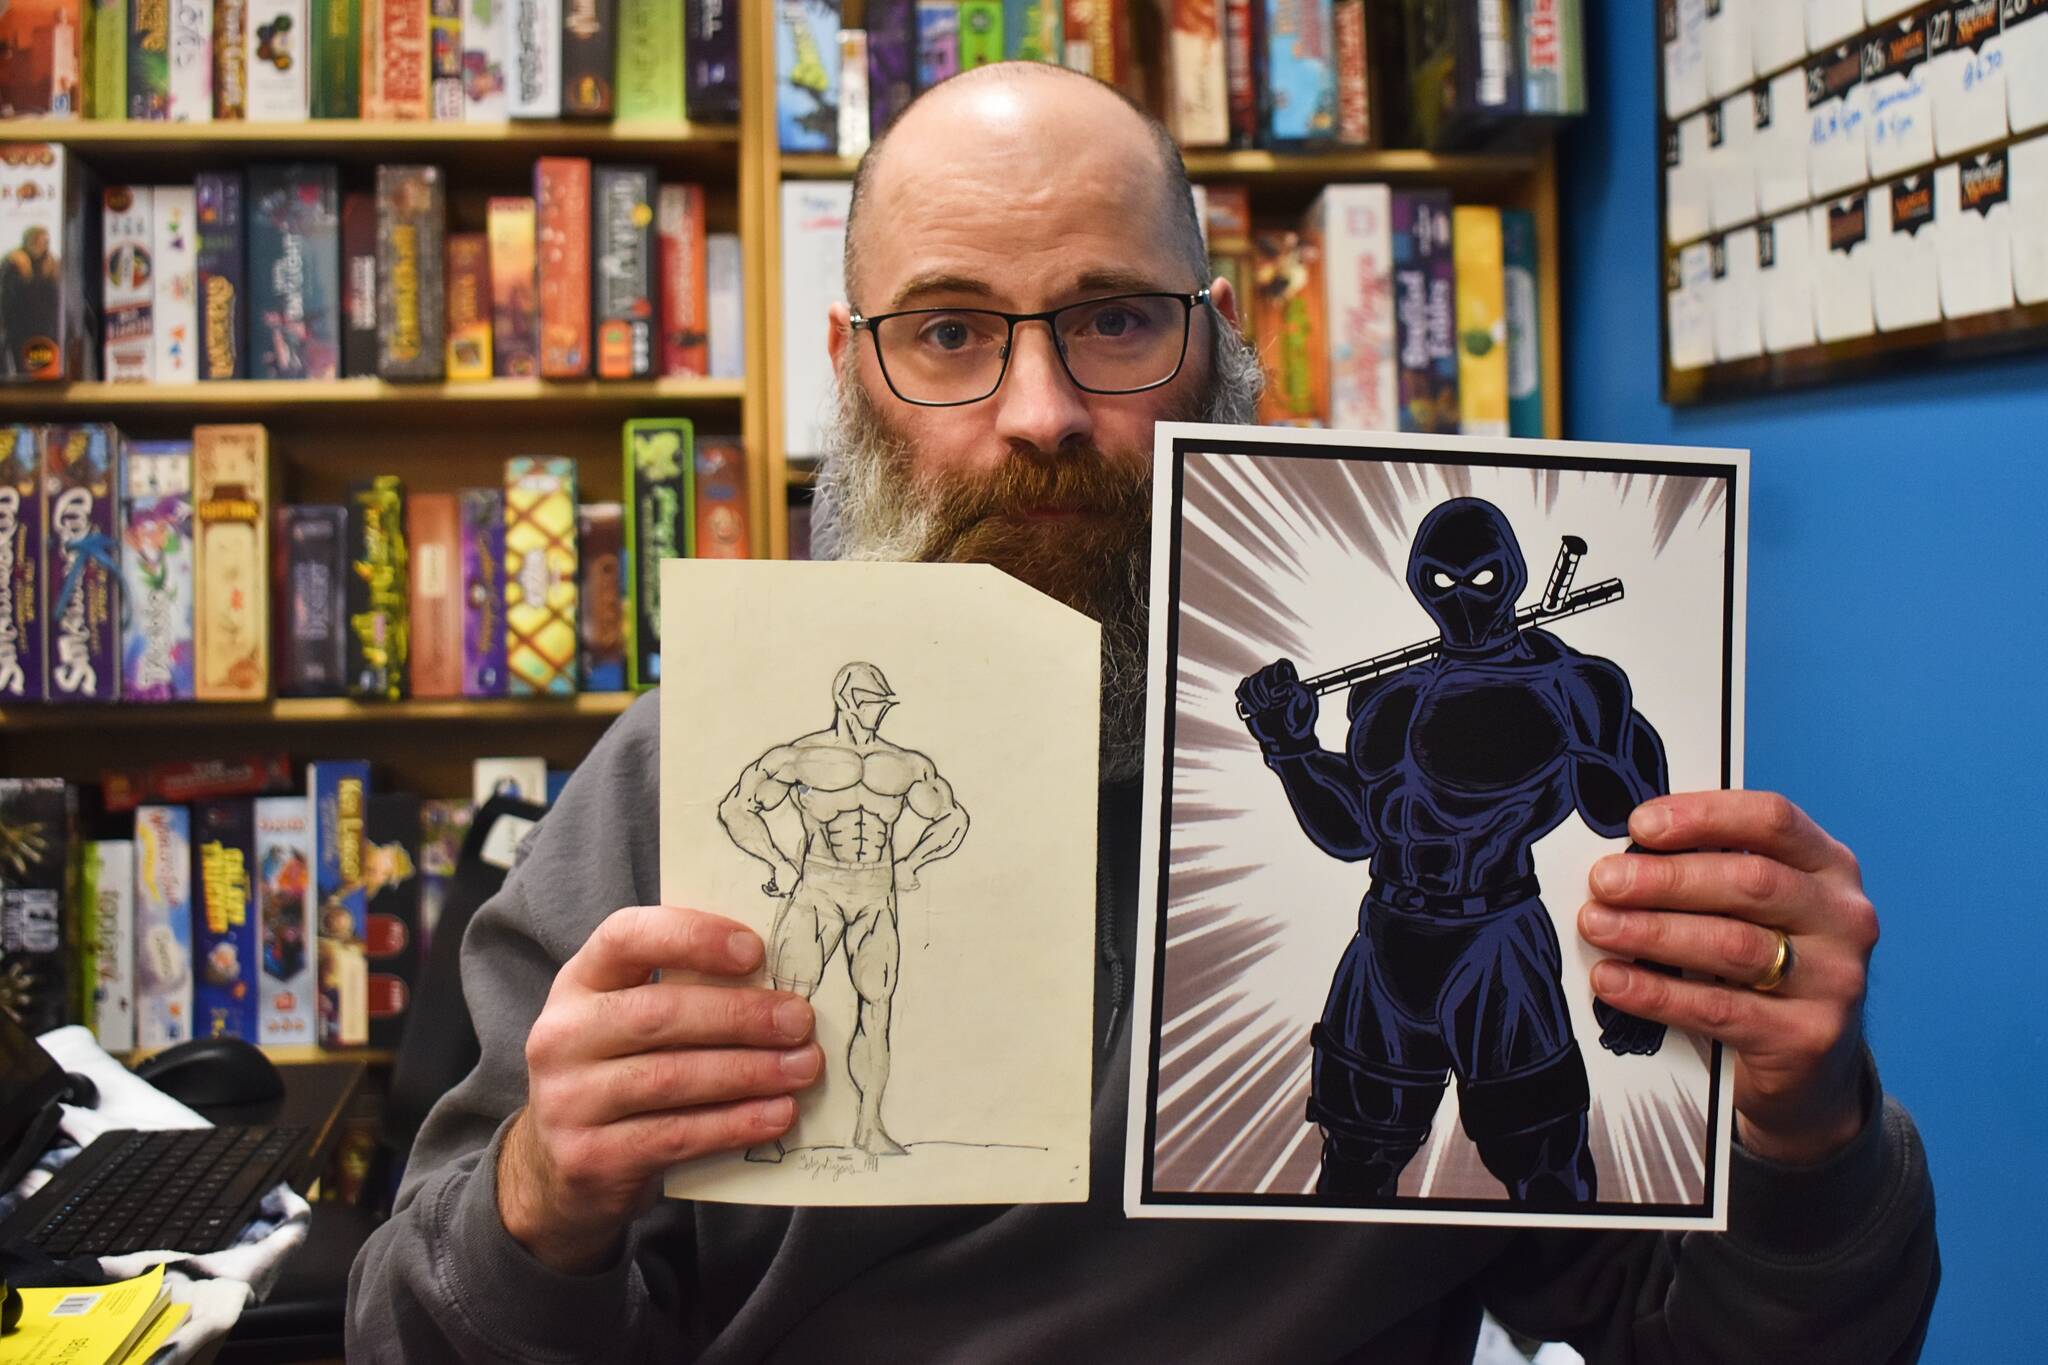 Toby Dycus holds up the oldest sketch of his character “Nightstik” next to a recent rendition. Alex Bruell / The Mirror